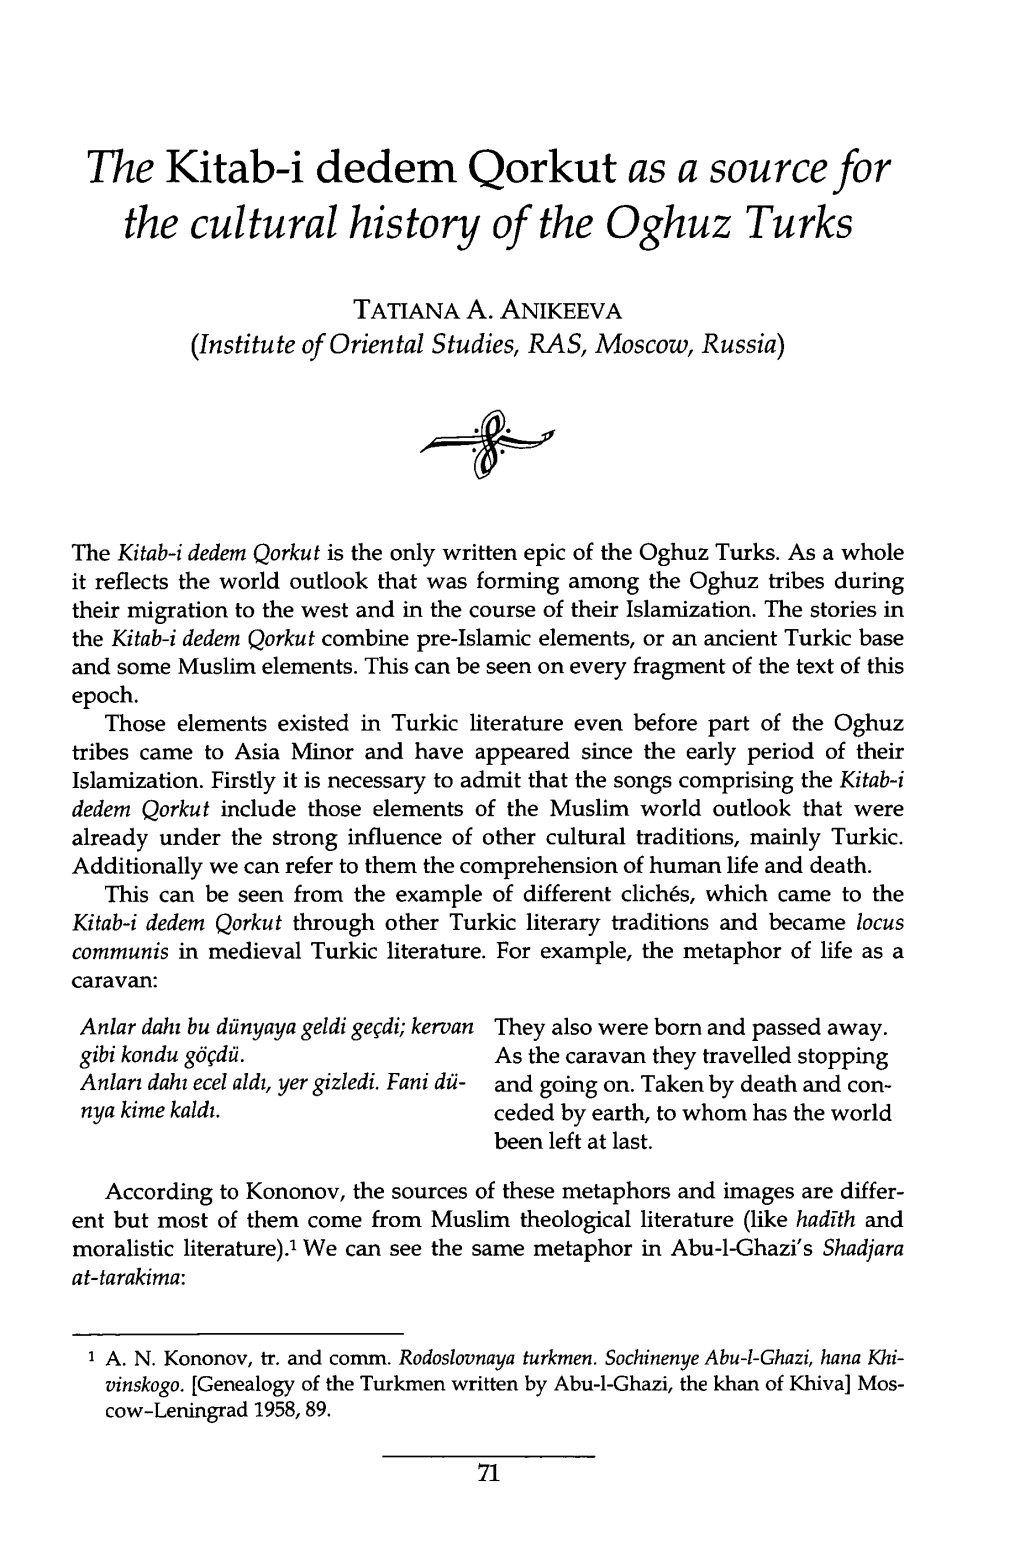 The Kitab-I Dedem Qorkut As a Source for the Cultural History of the Oghuz Turks